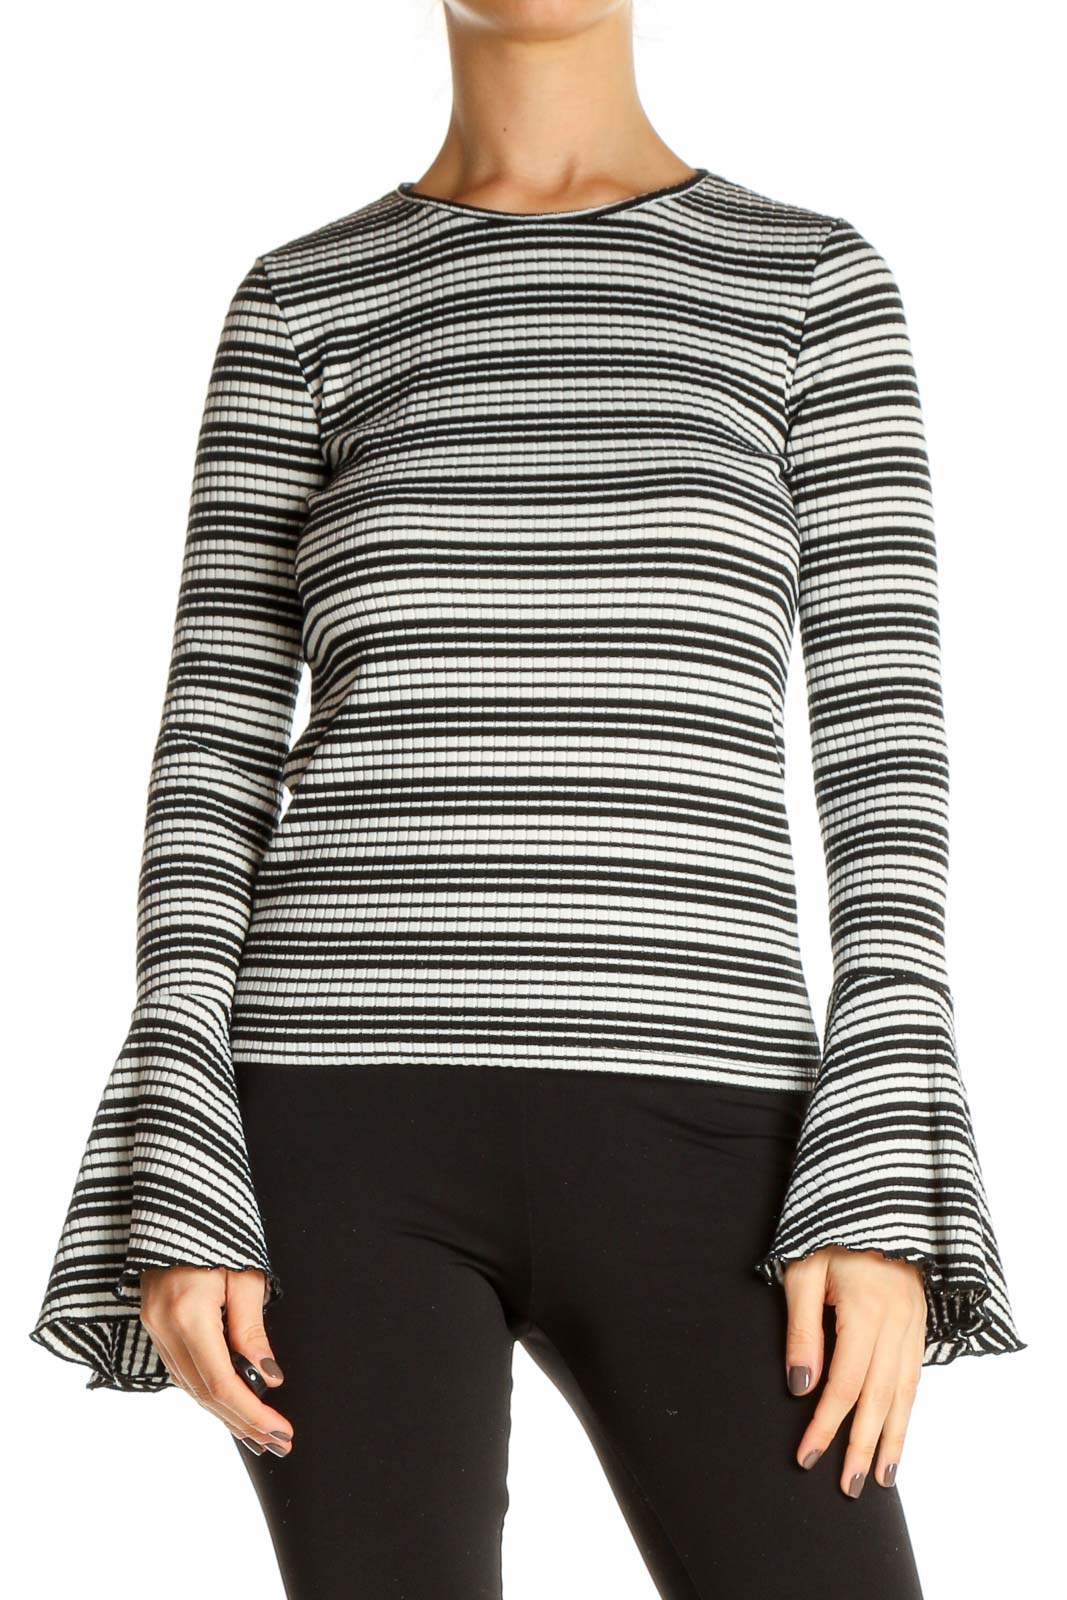 Black Striped Casual T-Shirt Front